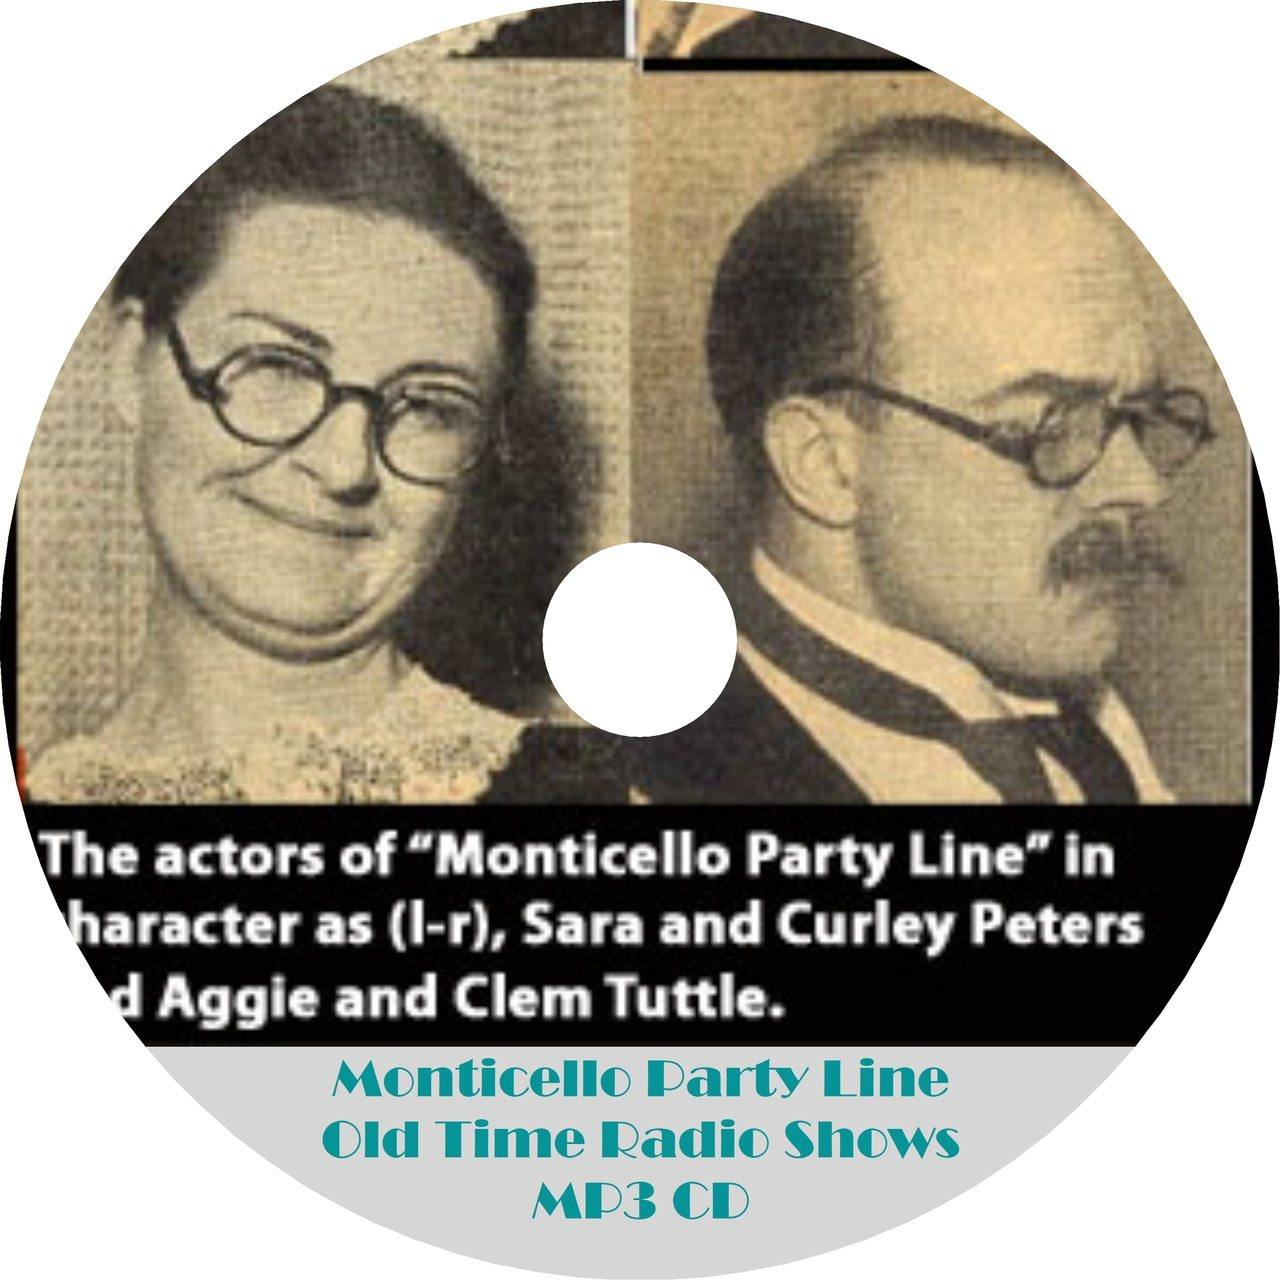 Monticello Party Line Old Time Radio Shows 17 Episodes On MP3 CD - OTR World